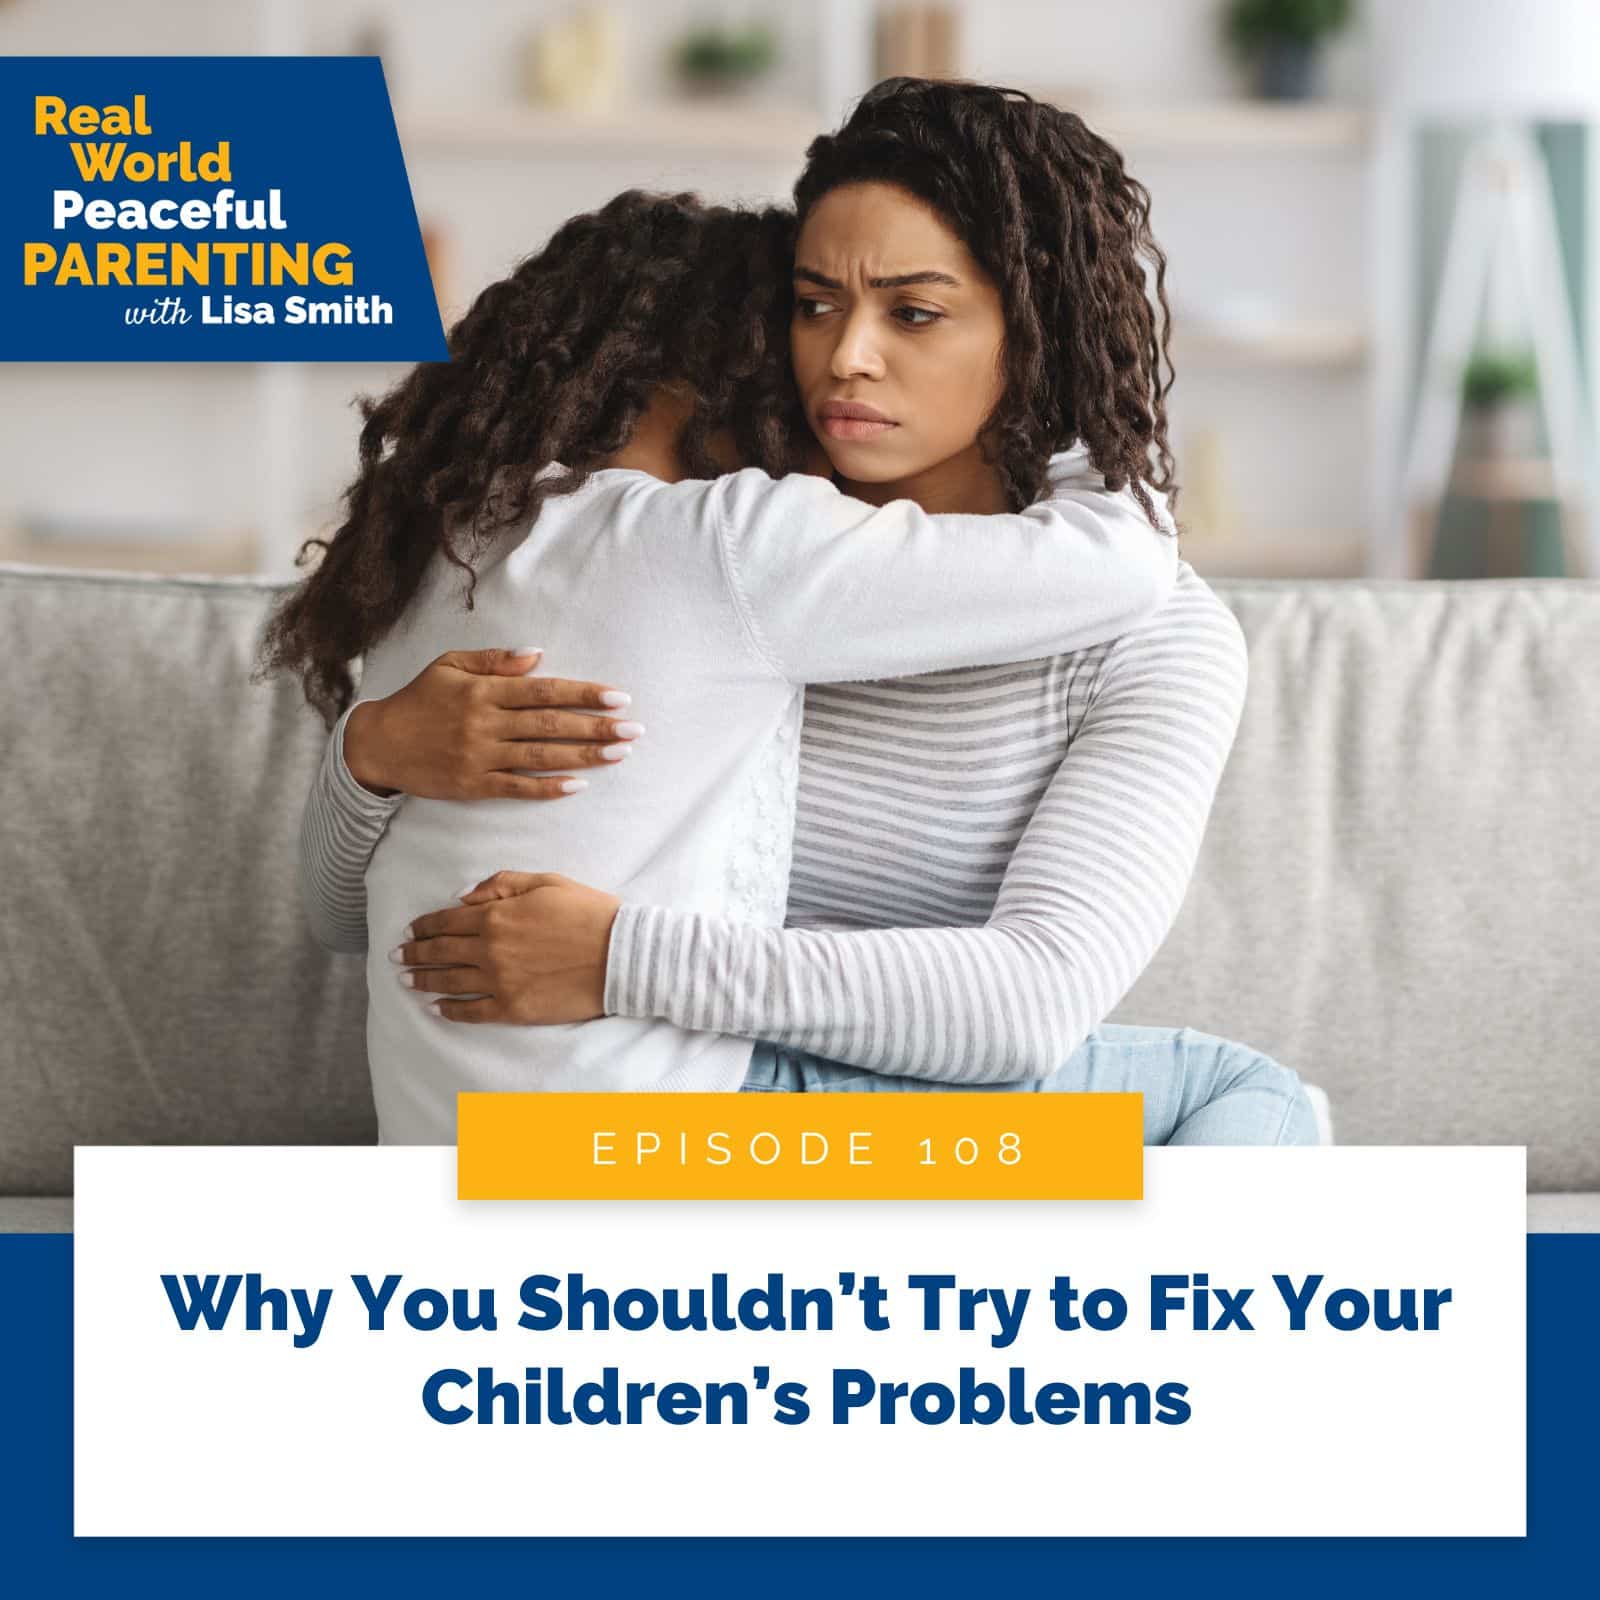 Real World Peaceful Parenting with Lisa Smith | Why You Shouldn’t Try to Fix Your Children’s Problems